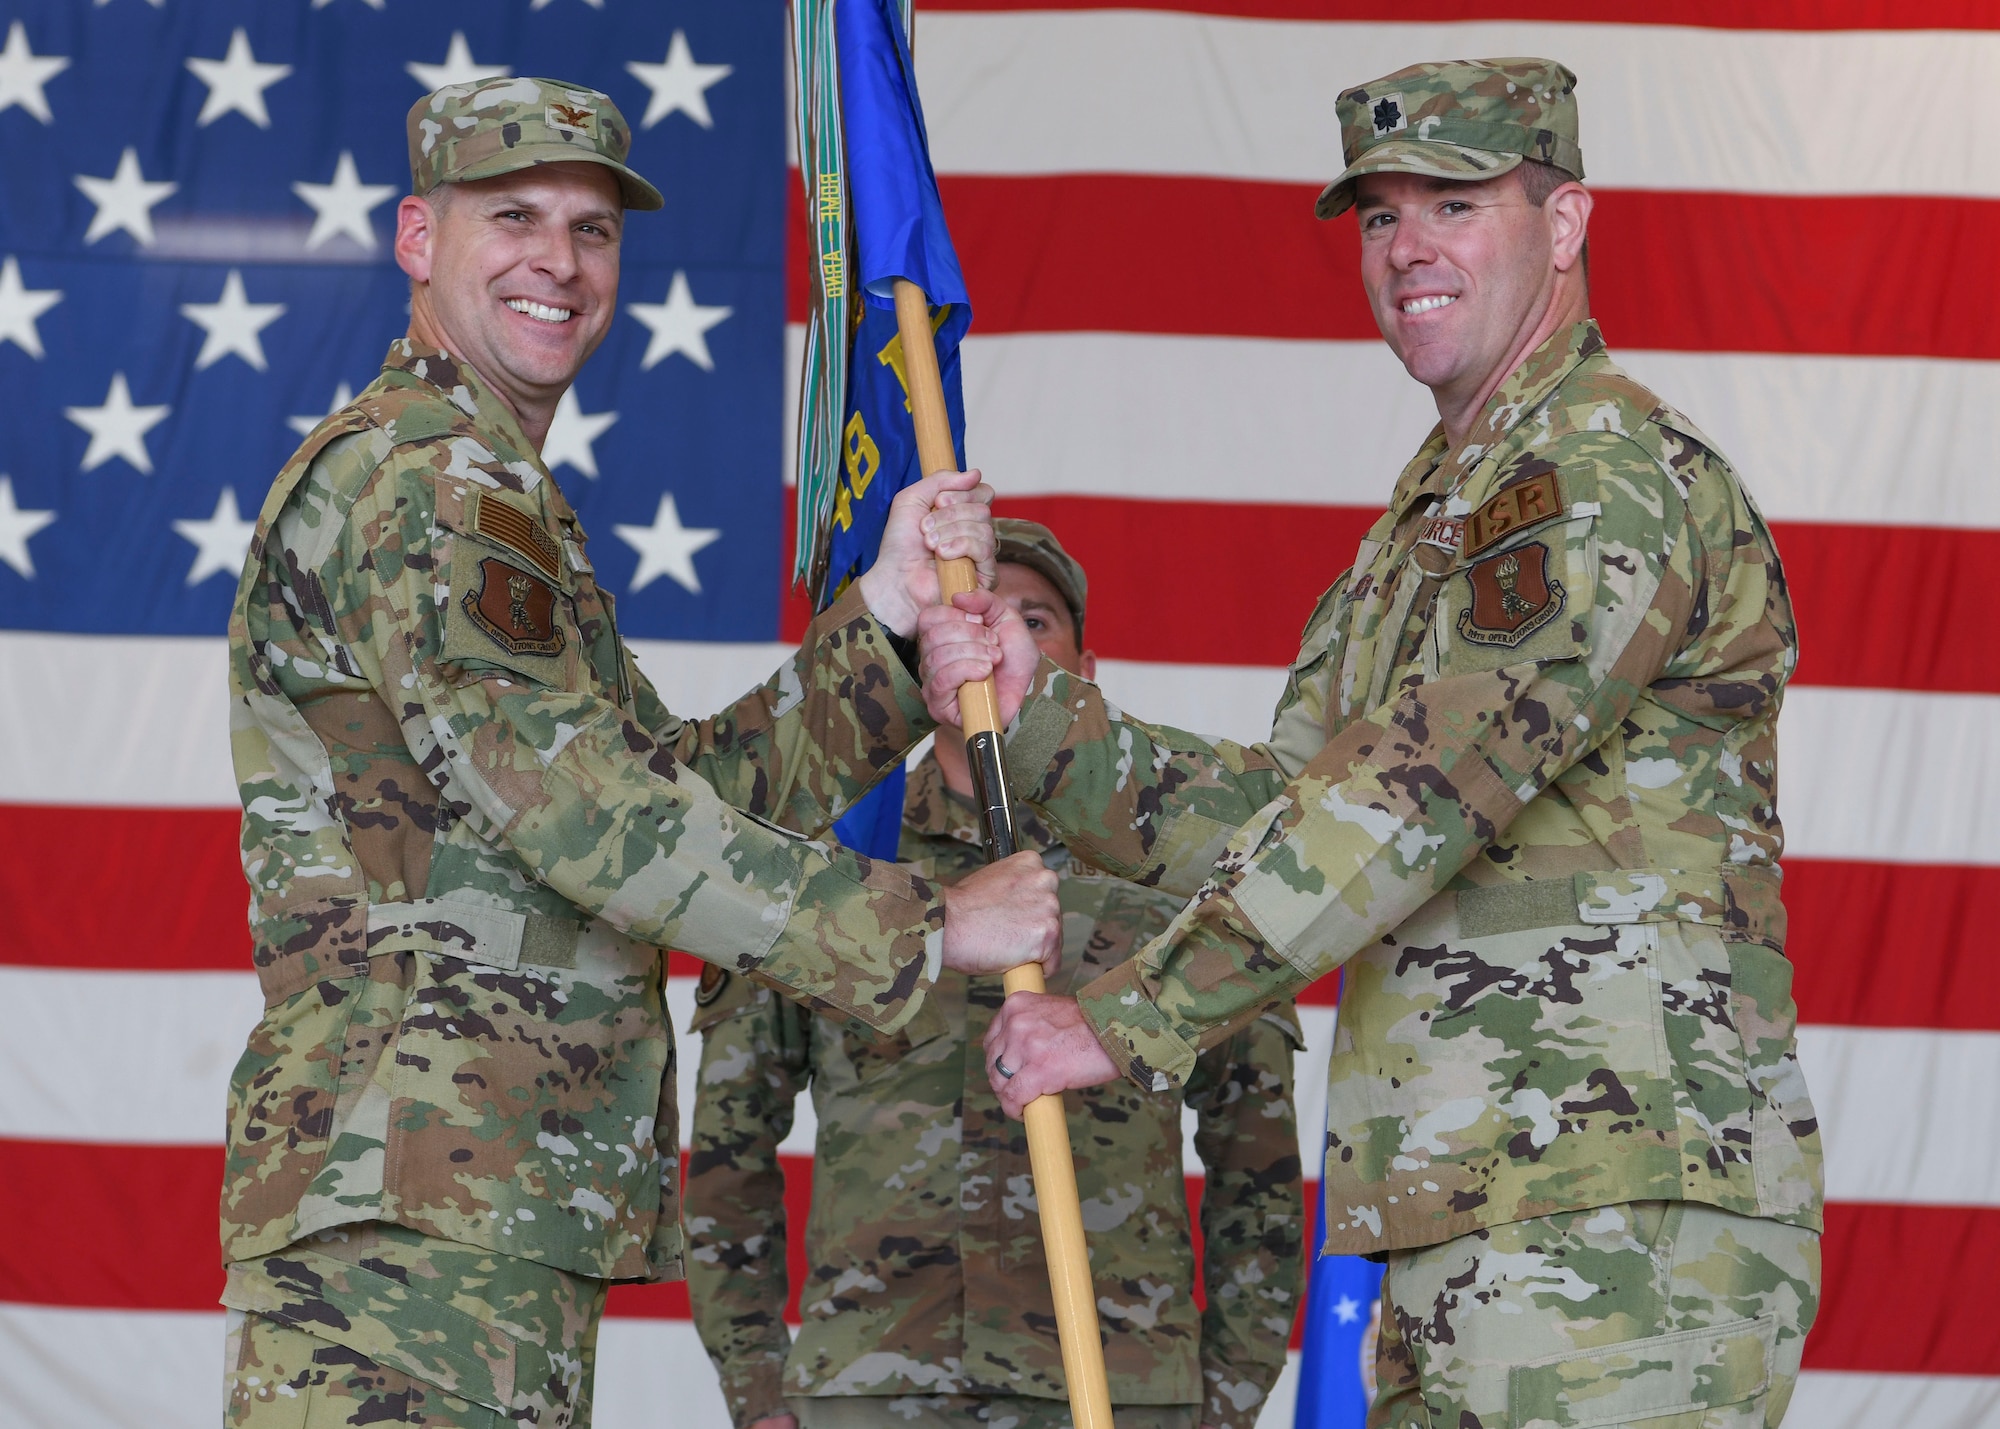 Two men in green uniforms hold a flag.